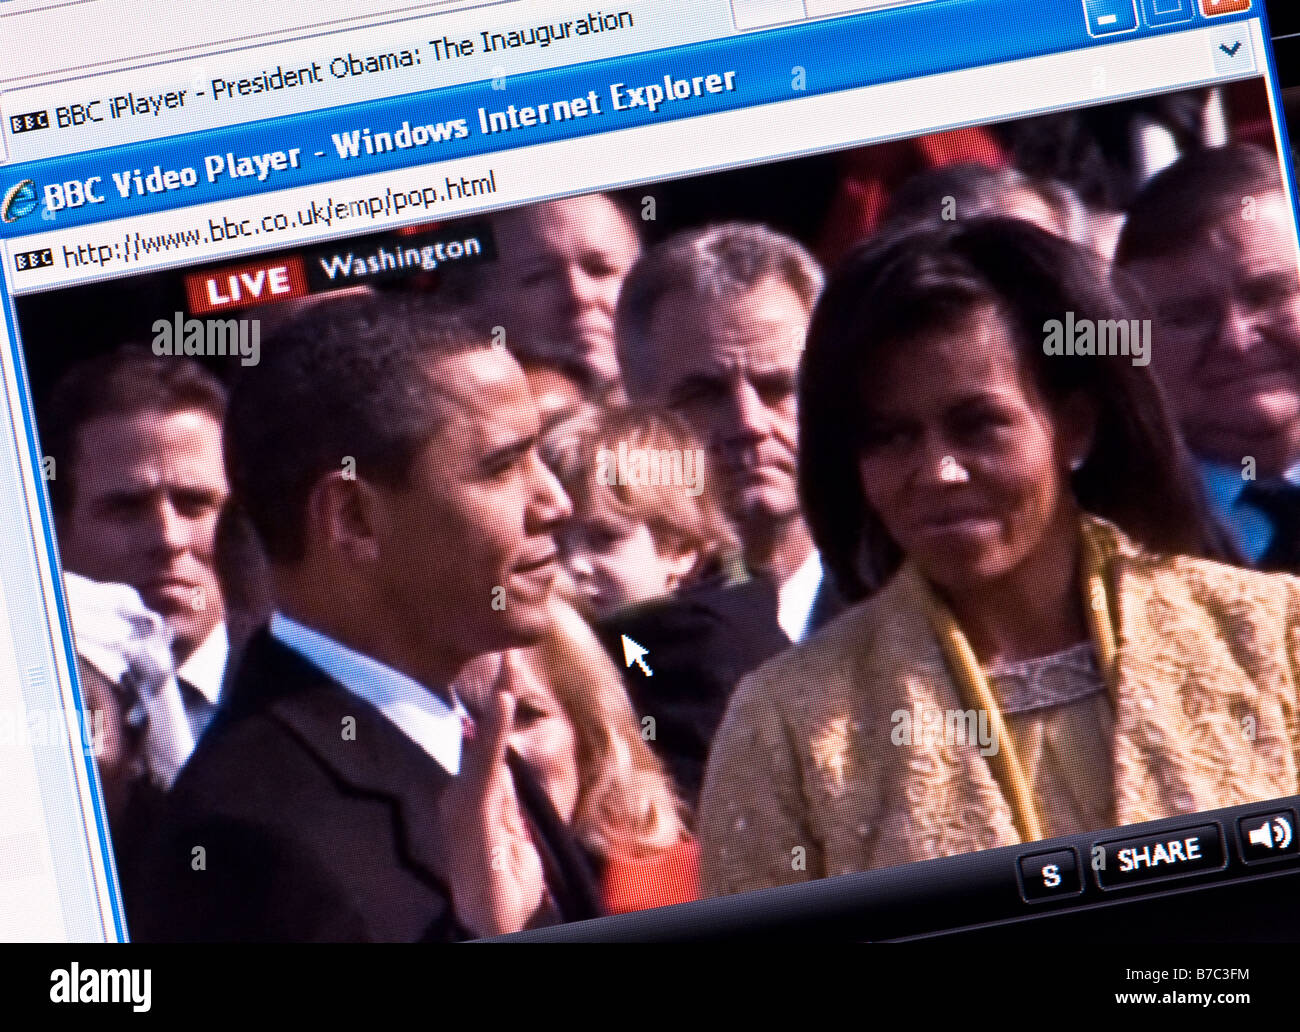 Screenshot of BBC internet coverage of inauguration of President Barack Obama - millions watched online (Editorial use only) Stock Photo